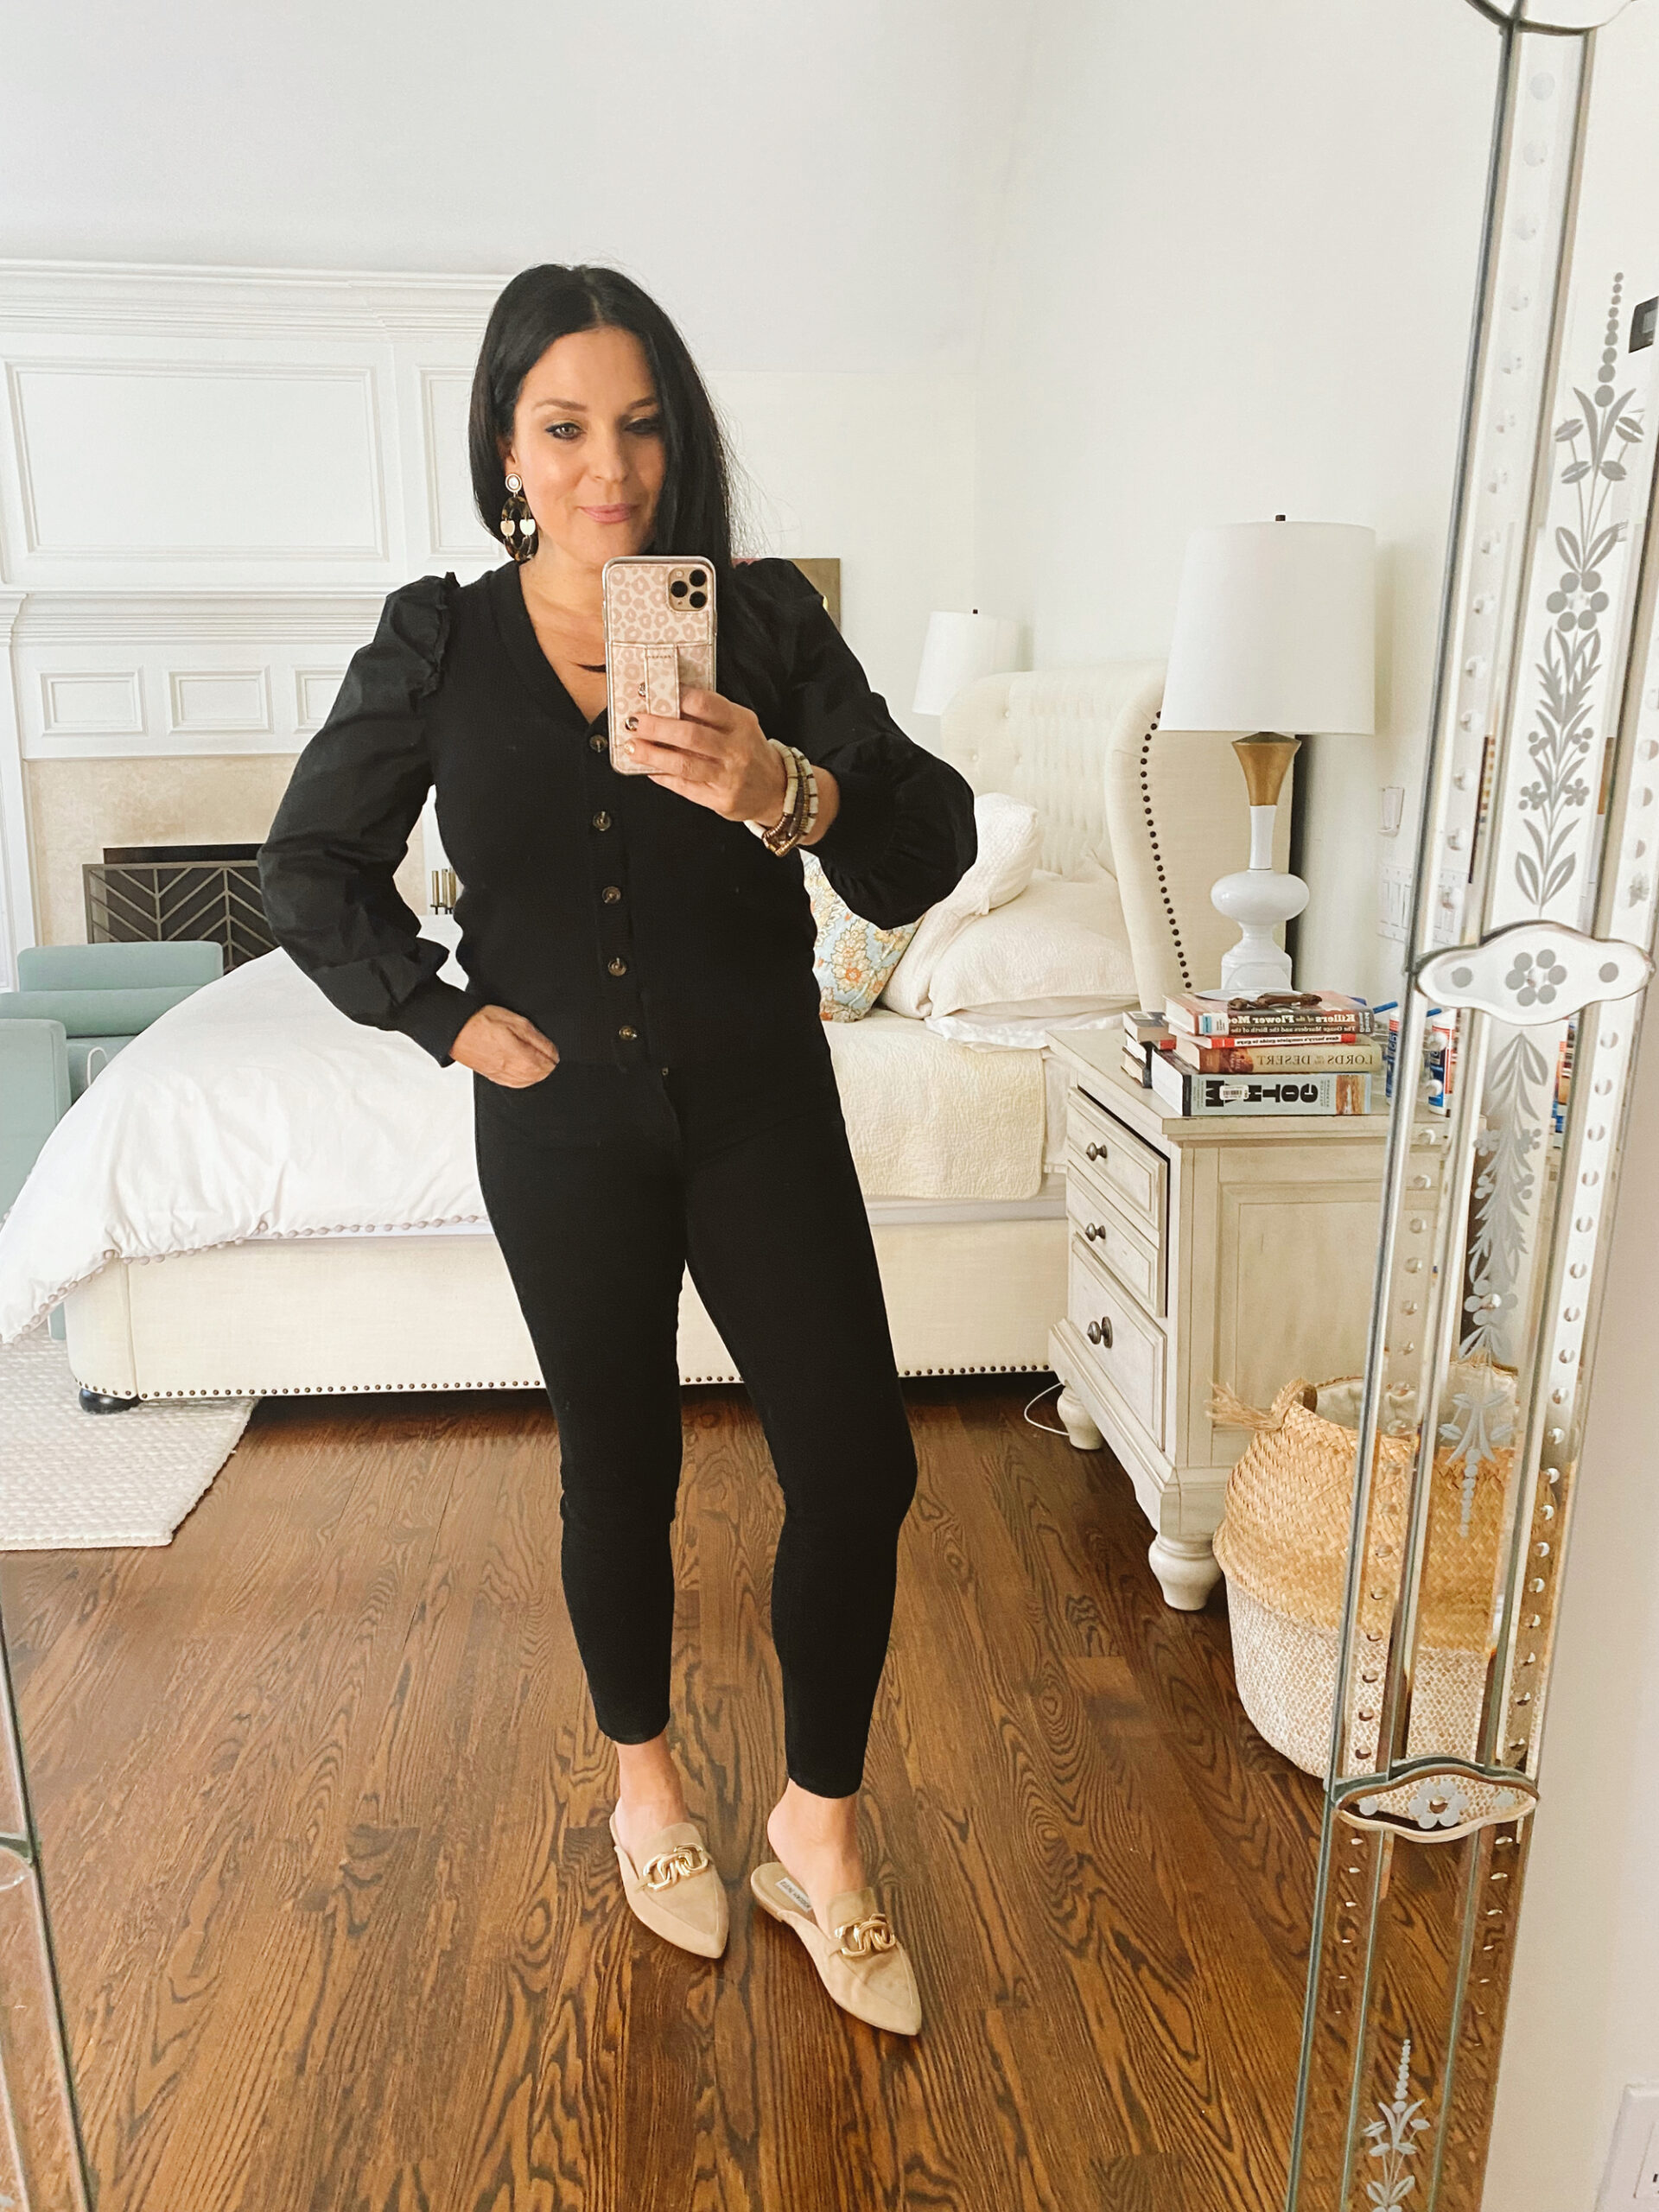 Favorite Sweater work outfits that are under $50 and for the Cold weather. Neutral simple colors that easily wear with black pants and mules. || Darling Darleen Top Lifestyle CT Blogger 